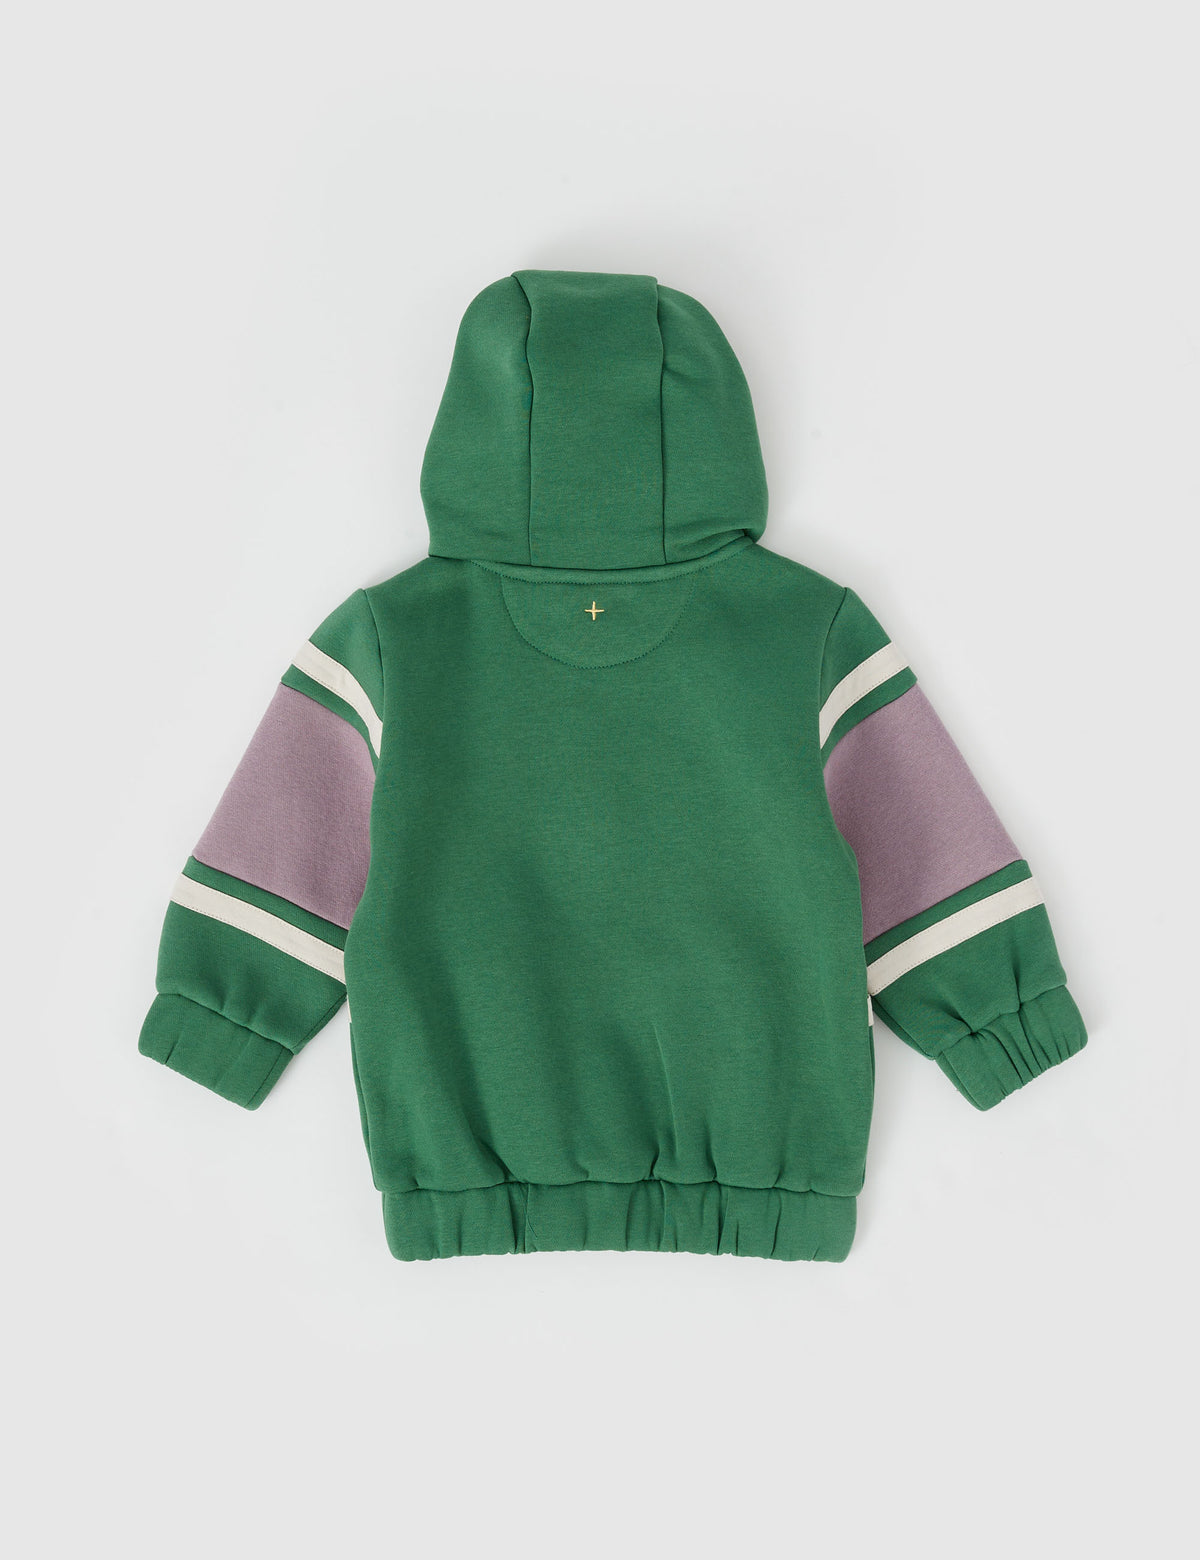 Goldie+Ace Hooded Panel Sweater